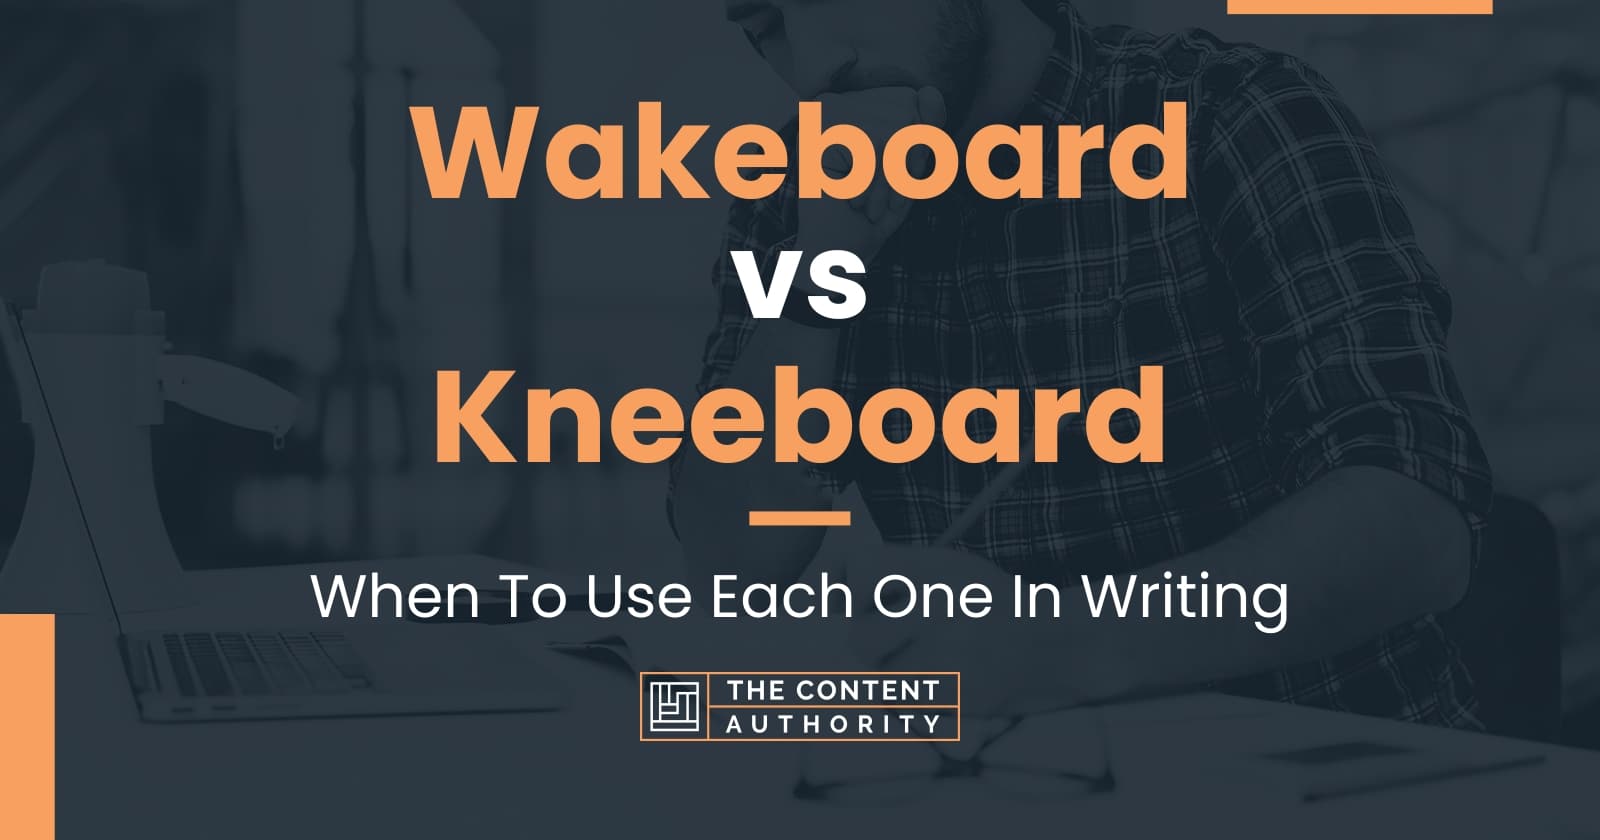 Wakeboard vs Kneeboard: When To Use Each One In Writing